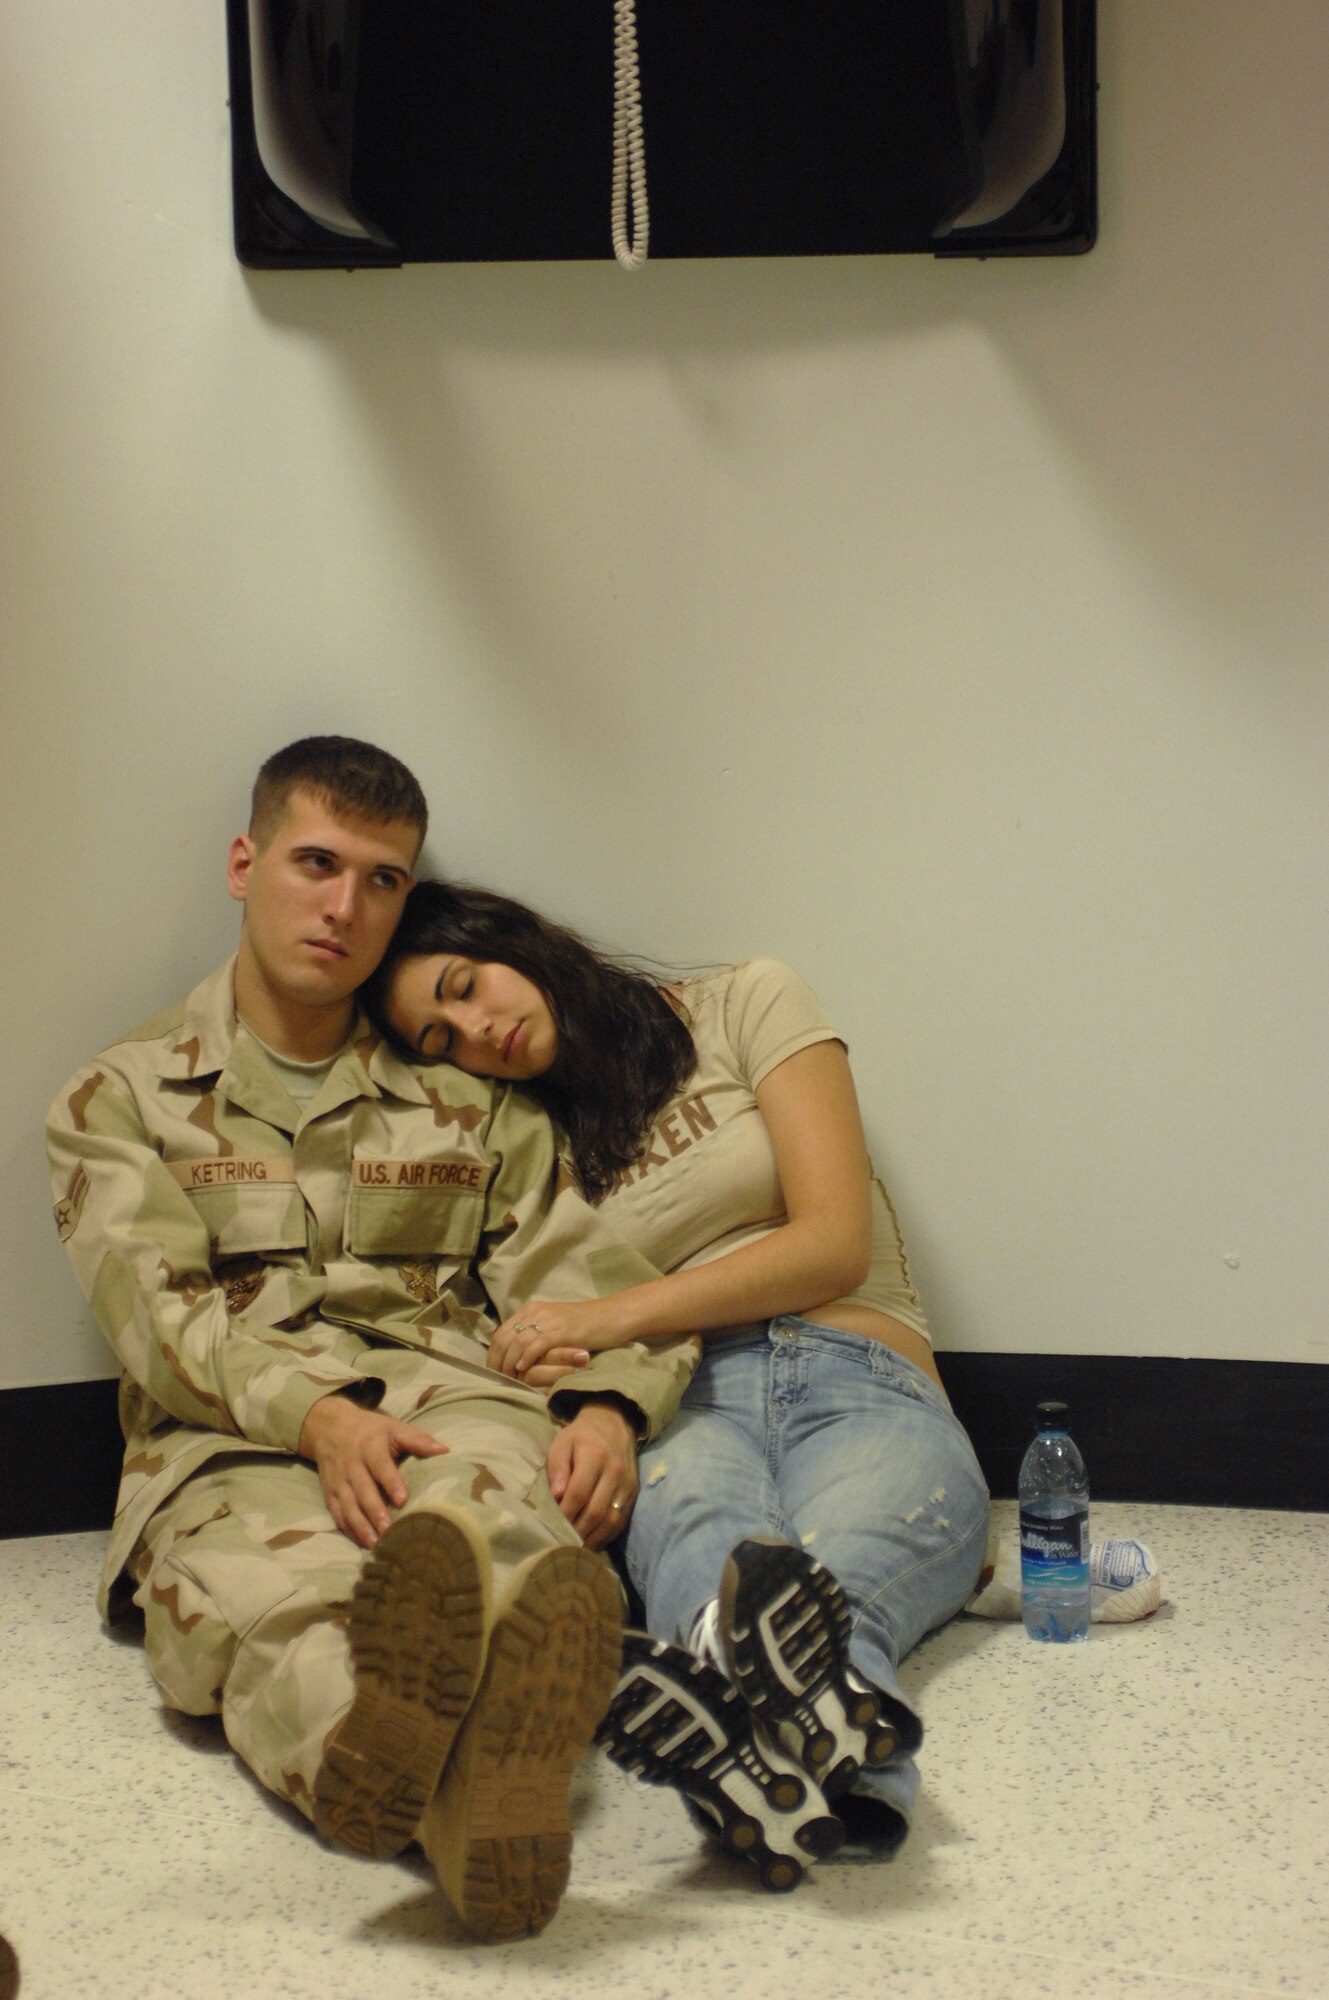 Airman 1st Class Tylor Ketring, 100th Civil Engineer Squadron firefighter, relaxes with his wife, Christine Mellor, while waiting for his deployment flight, Sept. 14, 2007. This is Airman Ketring's first deployment. "I'm worried, but I know firefighters don't have to go off base, so I know he'll be OK," said Ms. Mellor.  (U.S. Air Force photo by Tech. Sgt. Tracy L. DeMarco)
